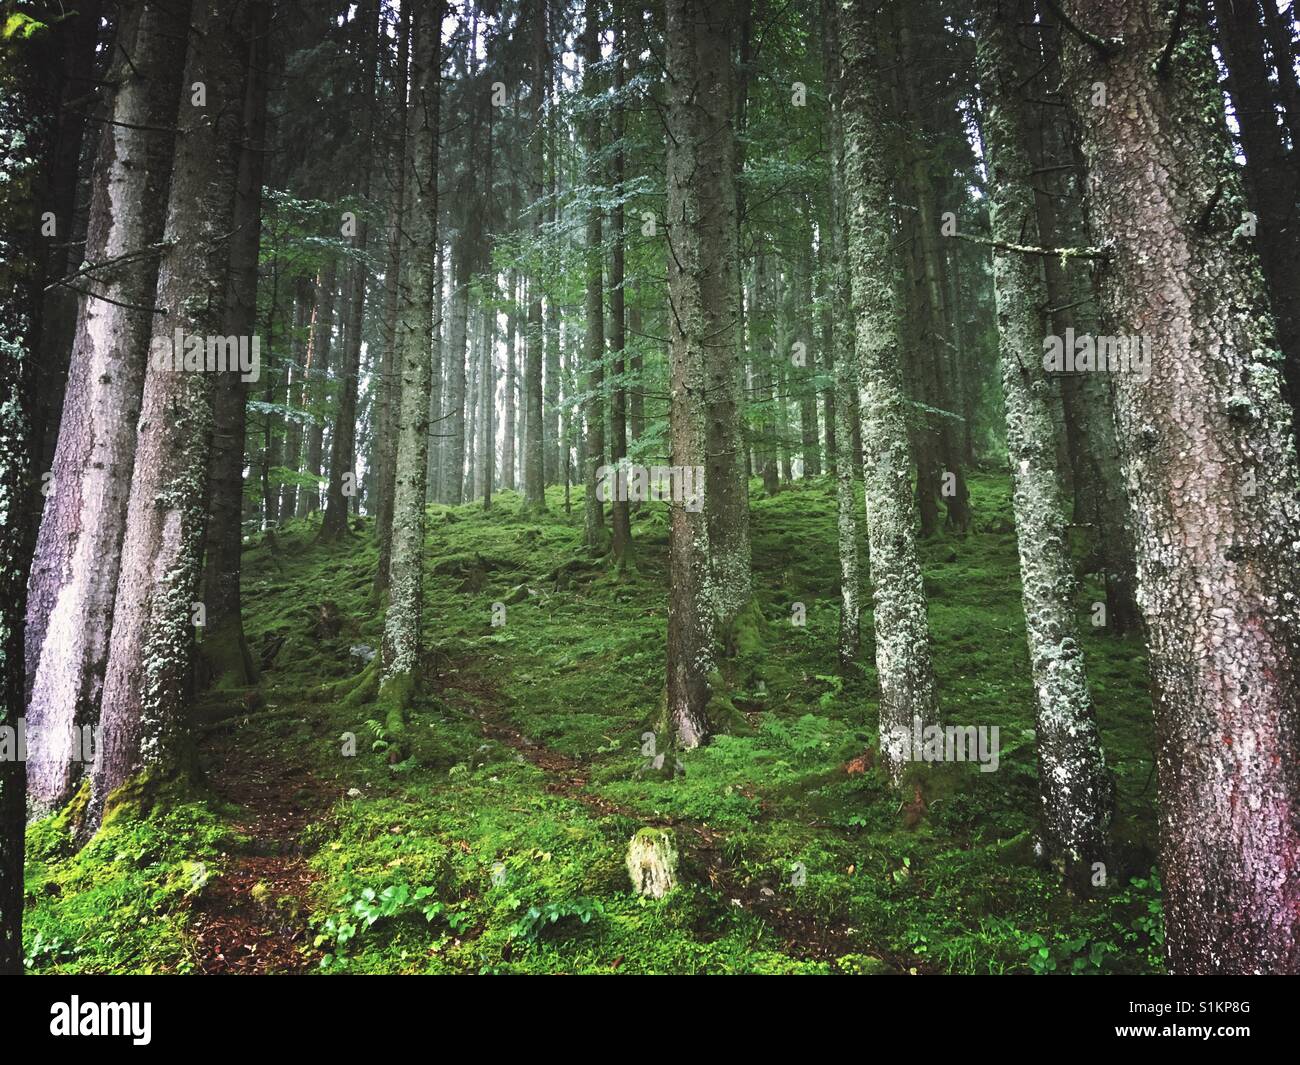 Dreamlike forest in the German Alps Stock Photo